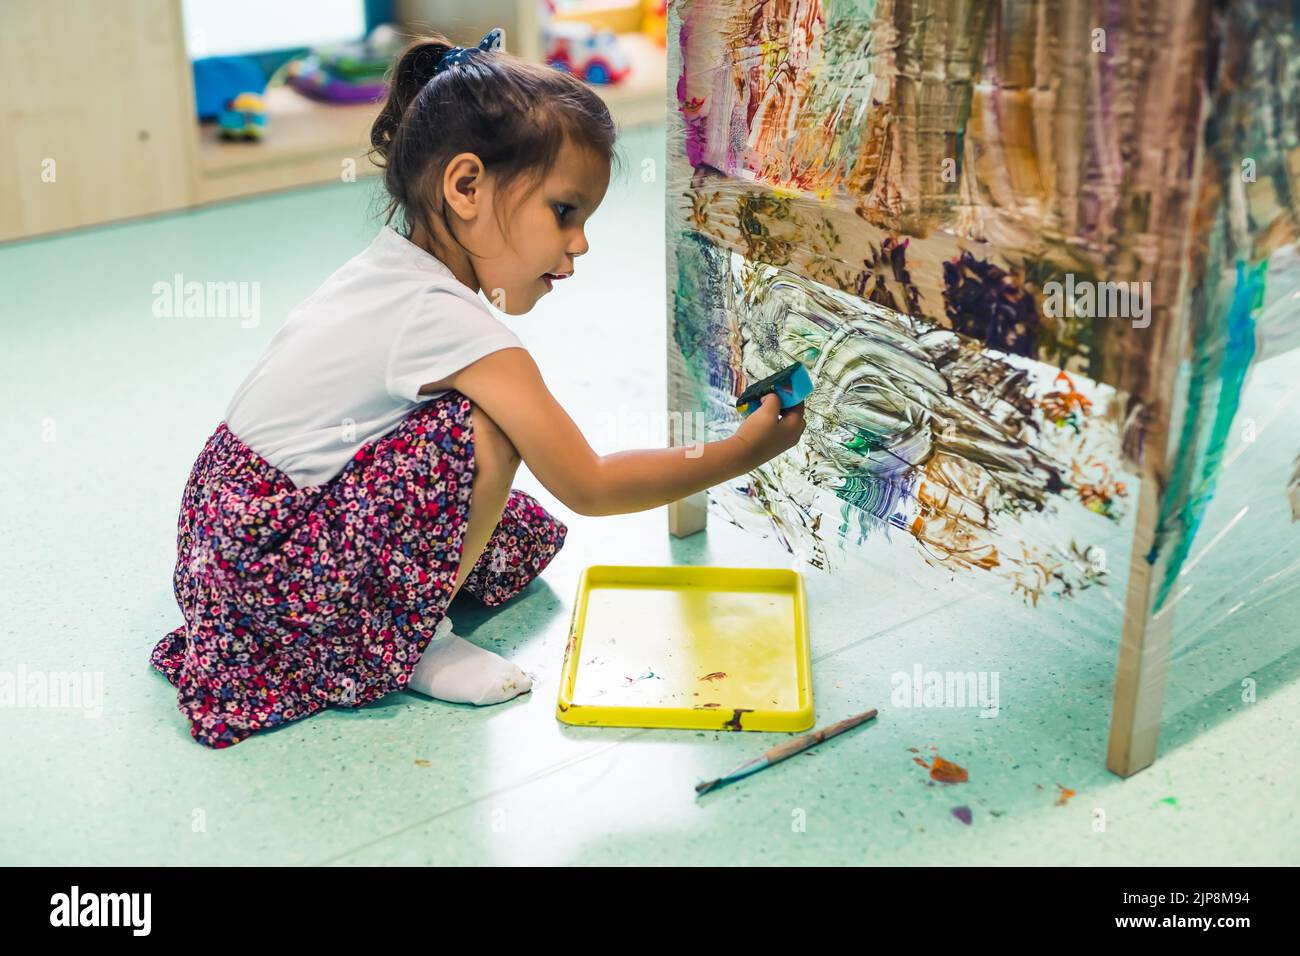 Cling film painting. Little girl toddler painting with a sponge and paints on a cling film wrapped all the way round the wooden shelf unit. Creative activity for kids development at the nursery school. High quality photo Stock Photo